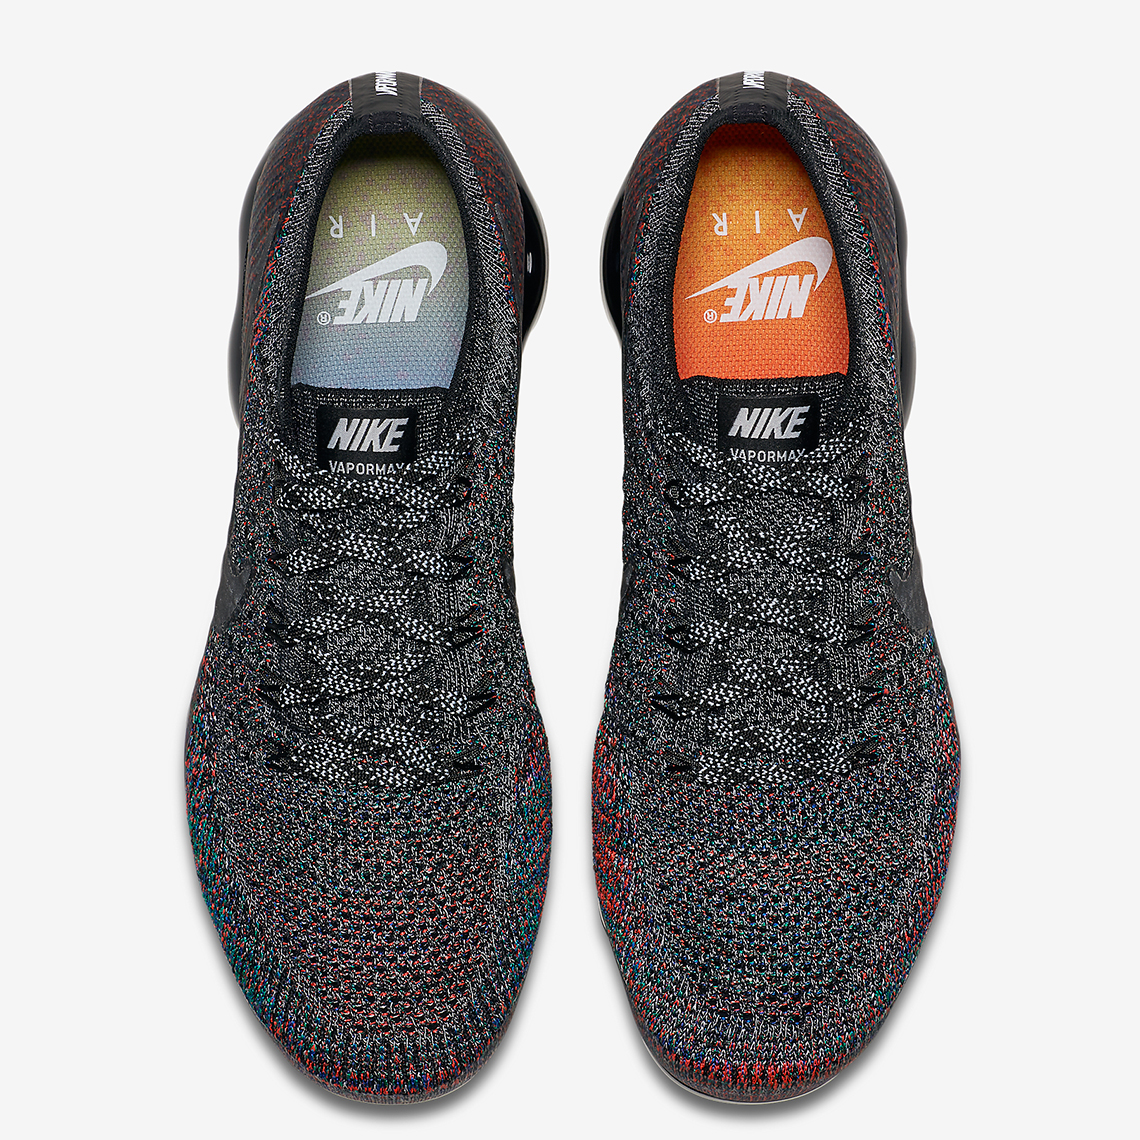 Nike Vapormax Chinese New Year 849558 016 Release Info 5